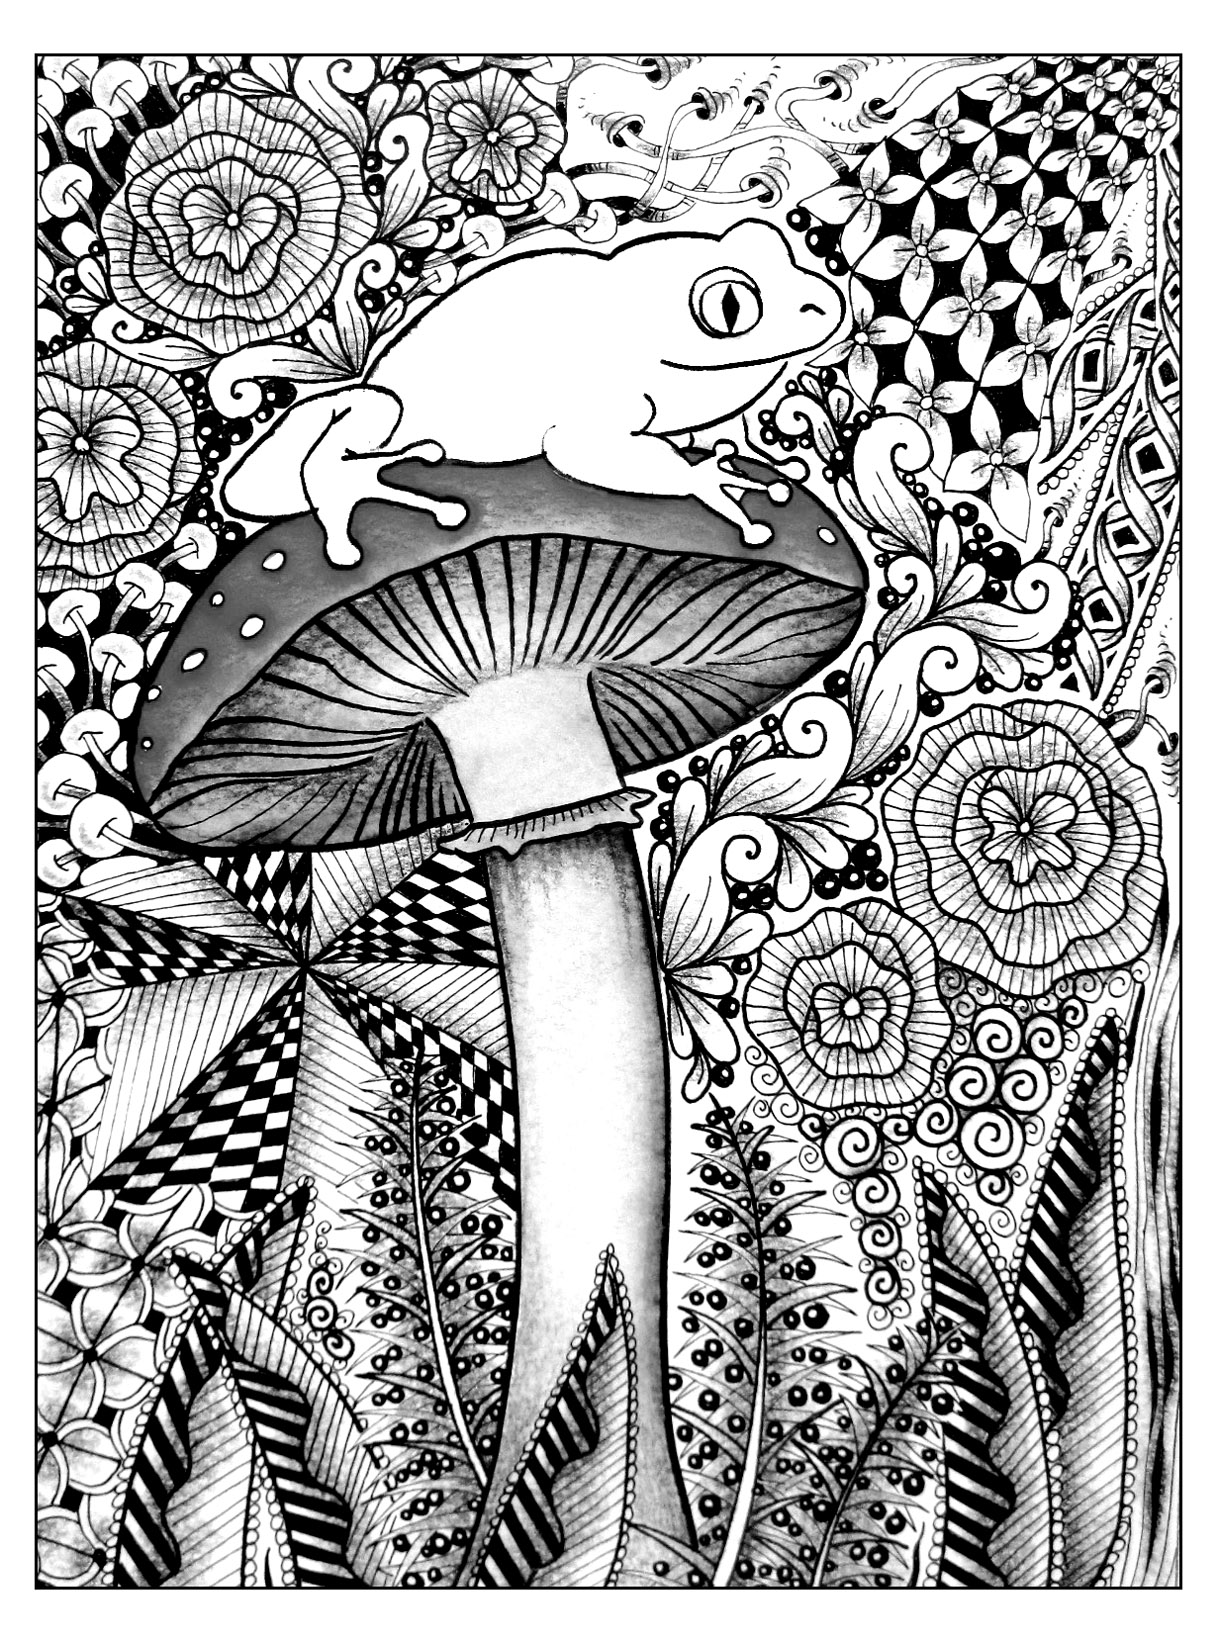 A Pretty Frog perched on a mushroom. A real challenge! In this drawing, a pretty frog is perched on a mushroom. They are surrounded by mesmerizing vegetation ... There are a lot of details to take into account to make this coloring.